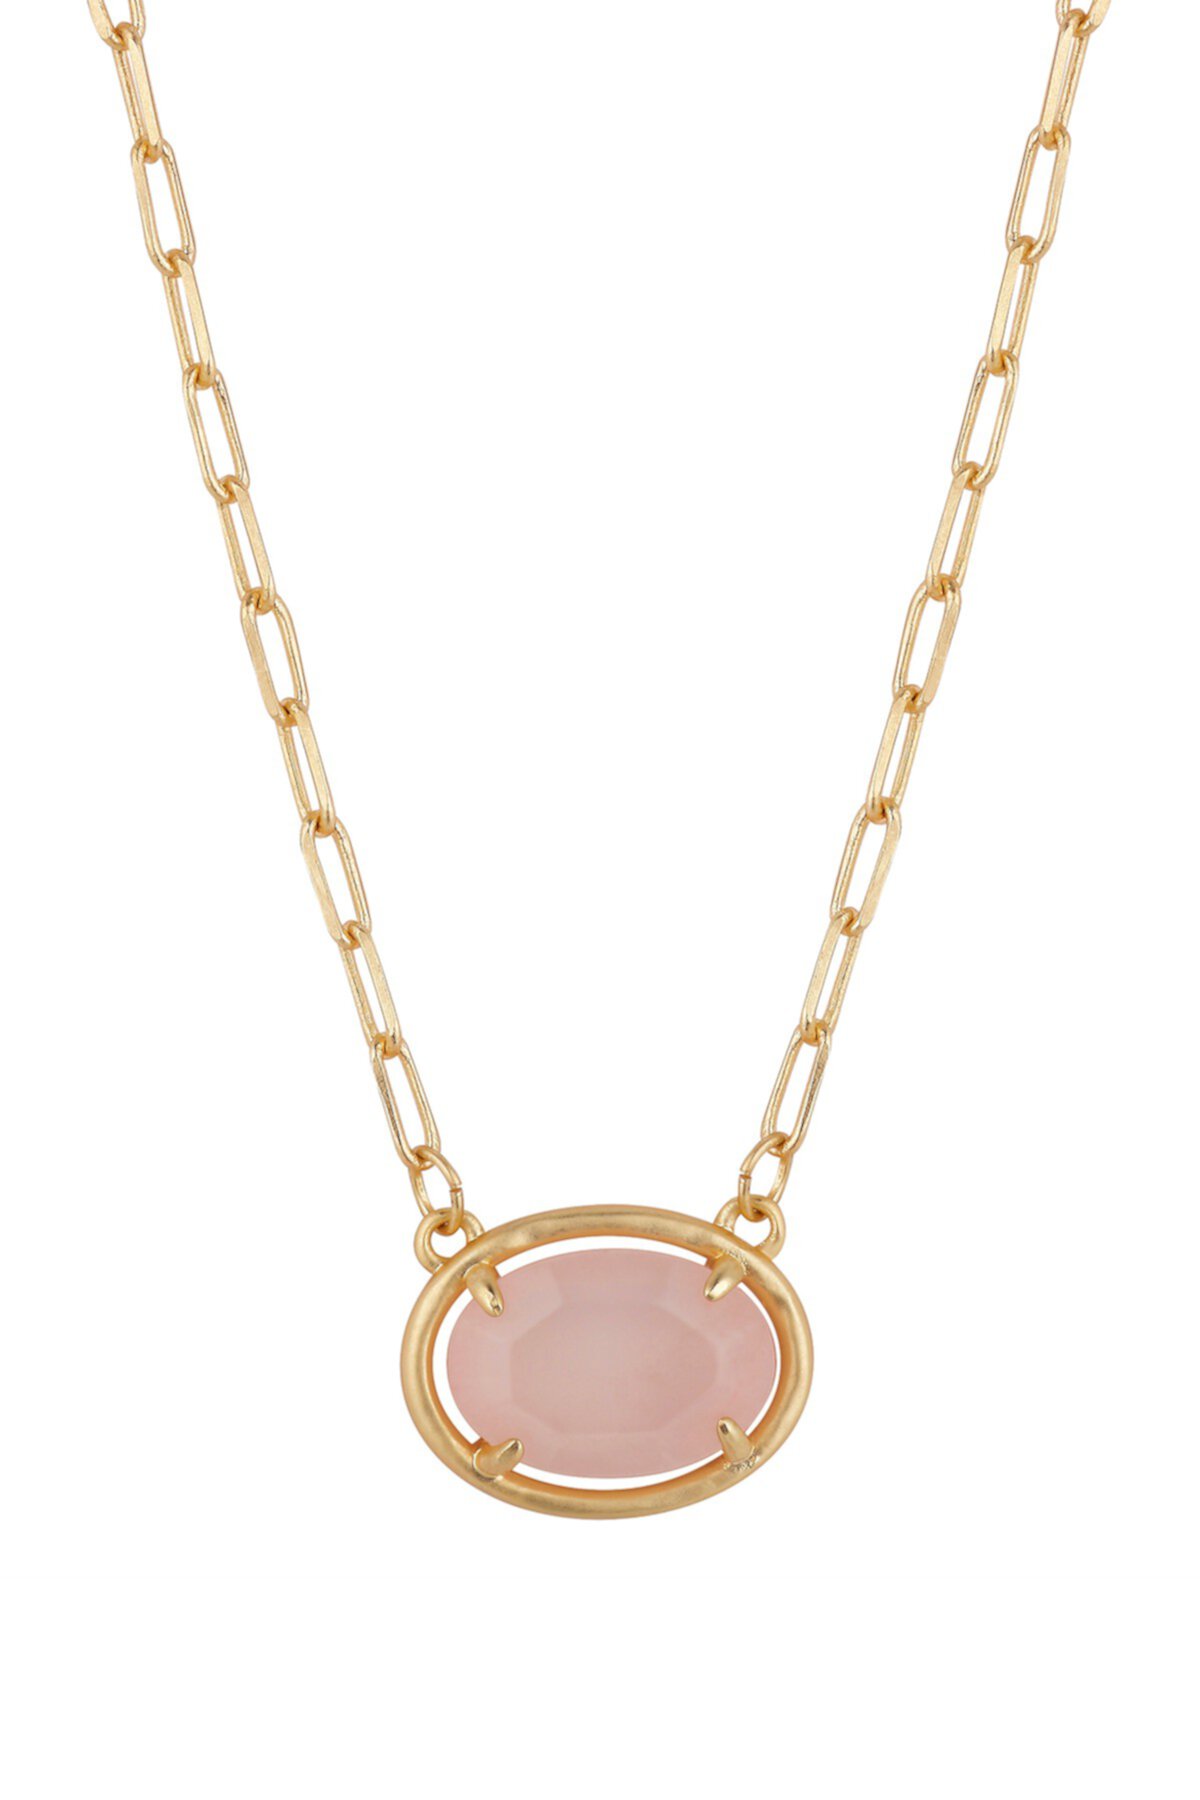 Rose Quartz Oval Stationed Stone Necklace with Paperlink Chain LA Rocks